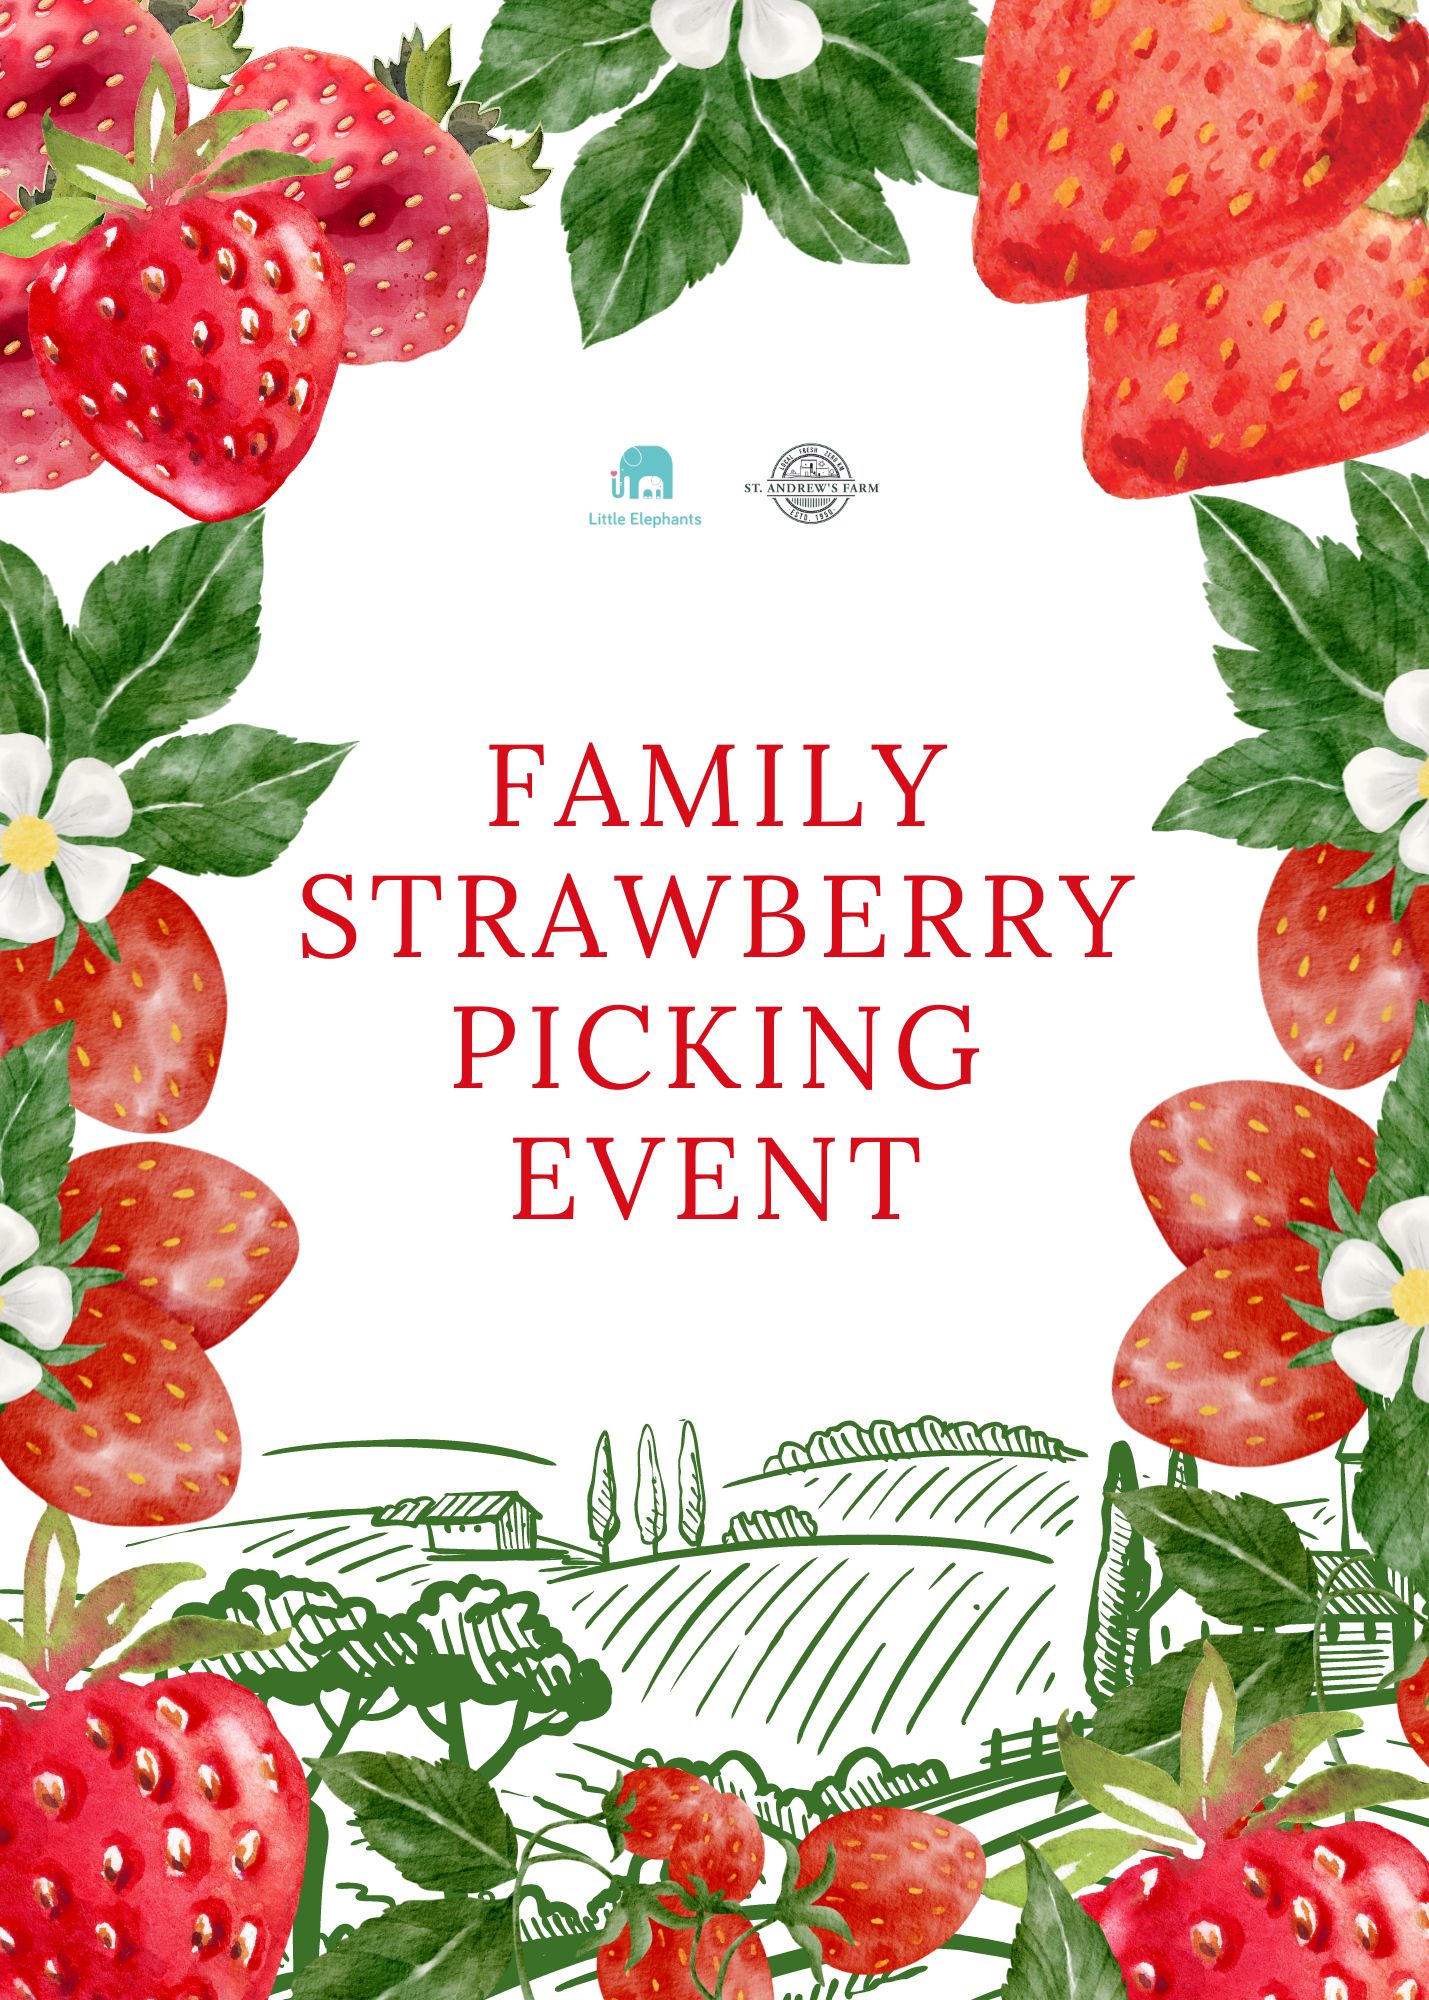 Strawberry Picking experience poster